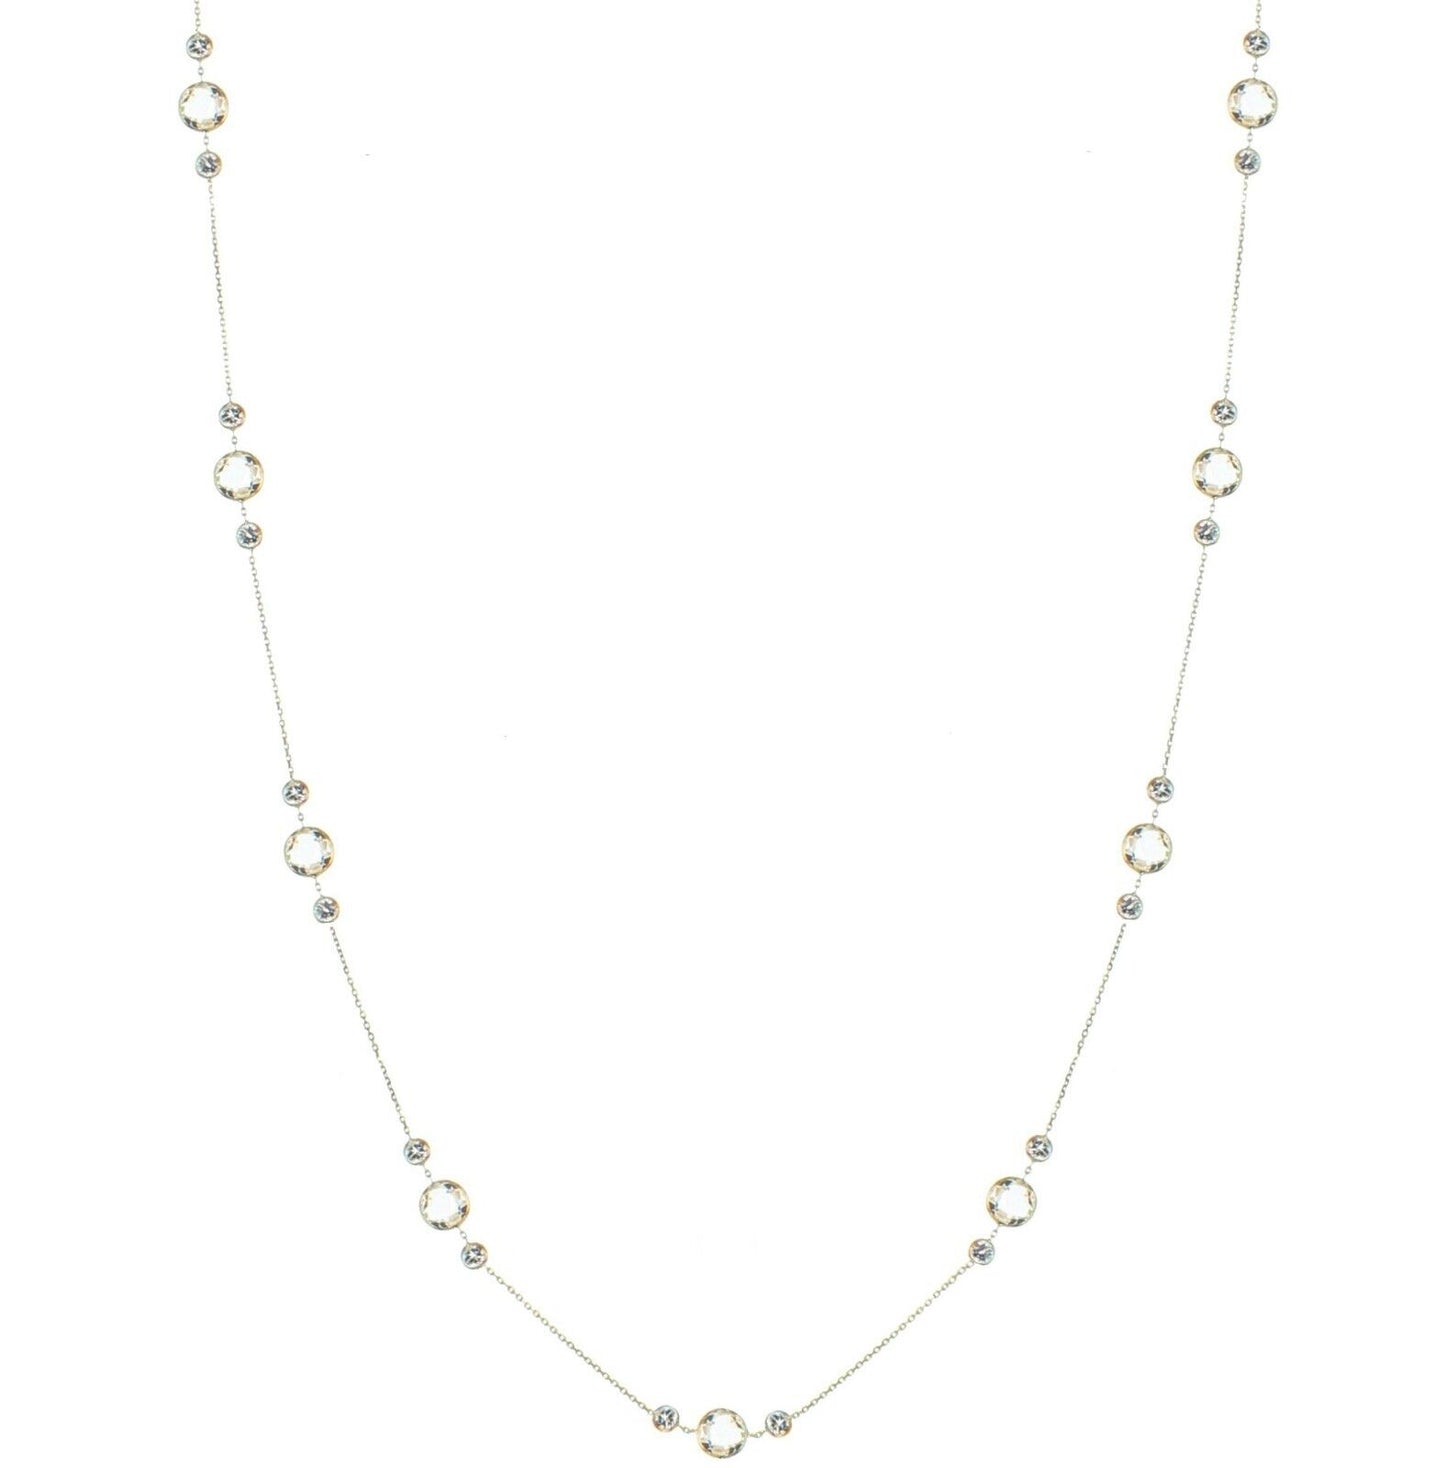 14K Yellow Gold Station Necklace With Crystal And White Topaz Gemstones 36 Inch